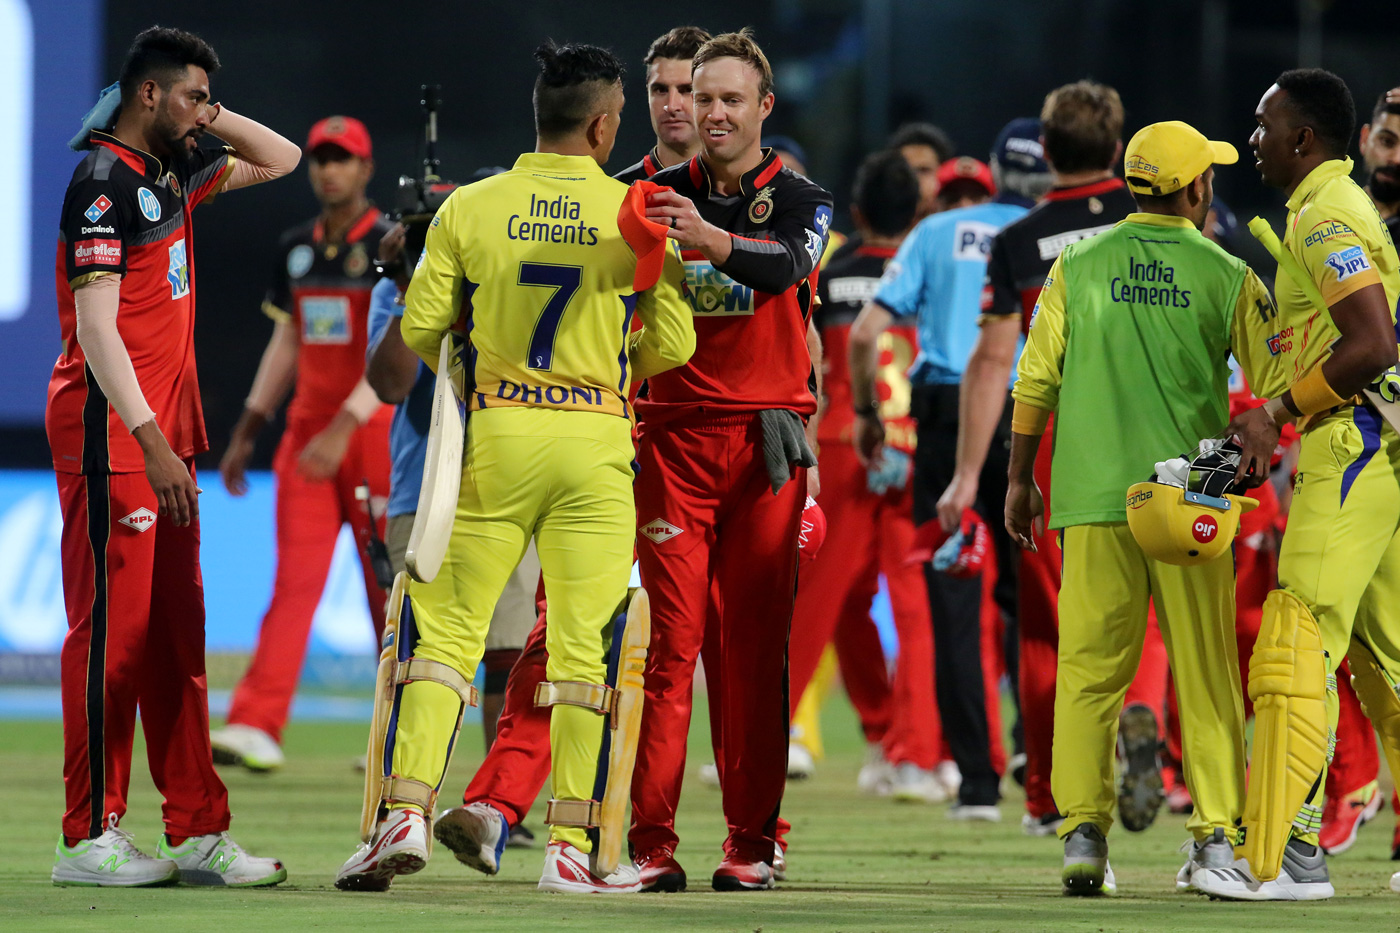 AB de Villiers supports MS Dhoni decision stepping down as CSK captain